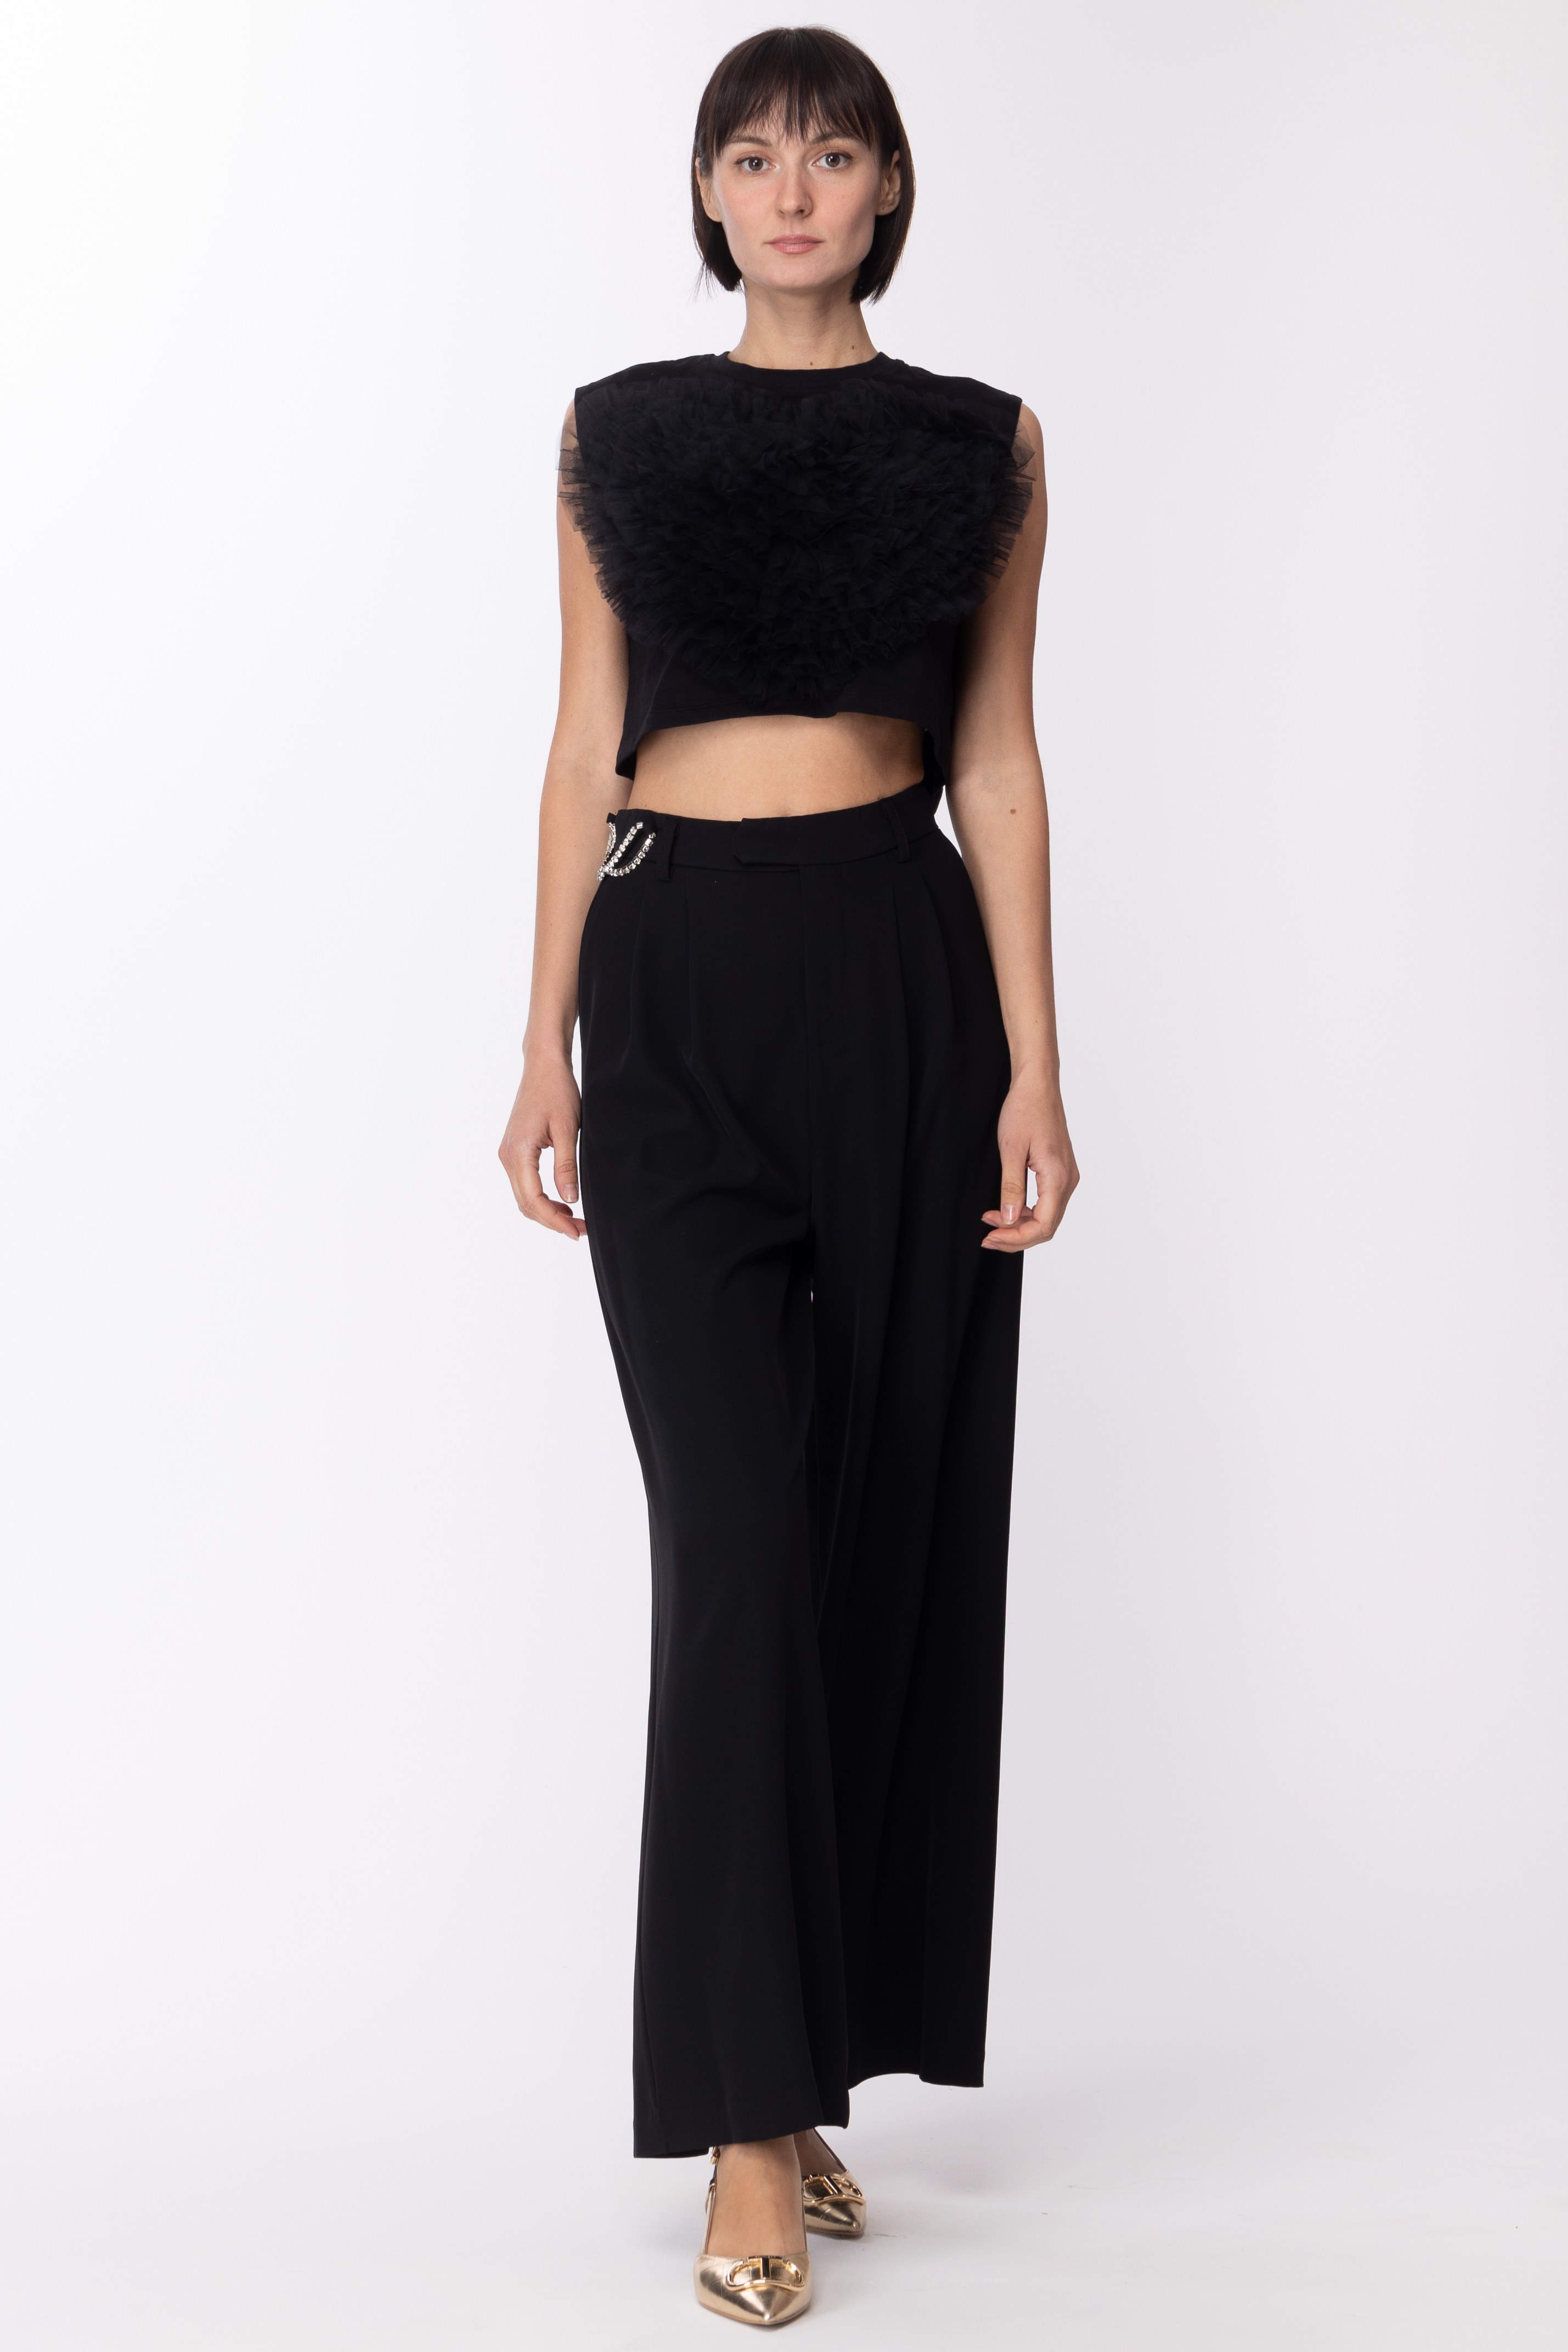 Anteprima: Aniye By Crop top Dolly con tulle Black